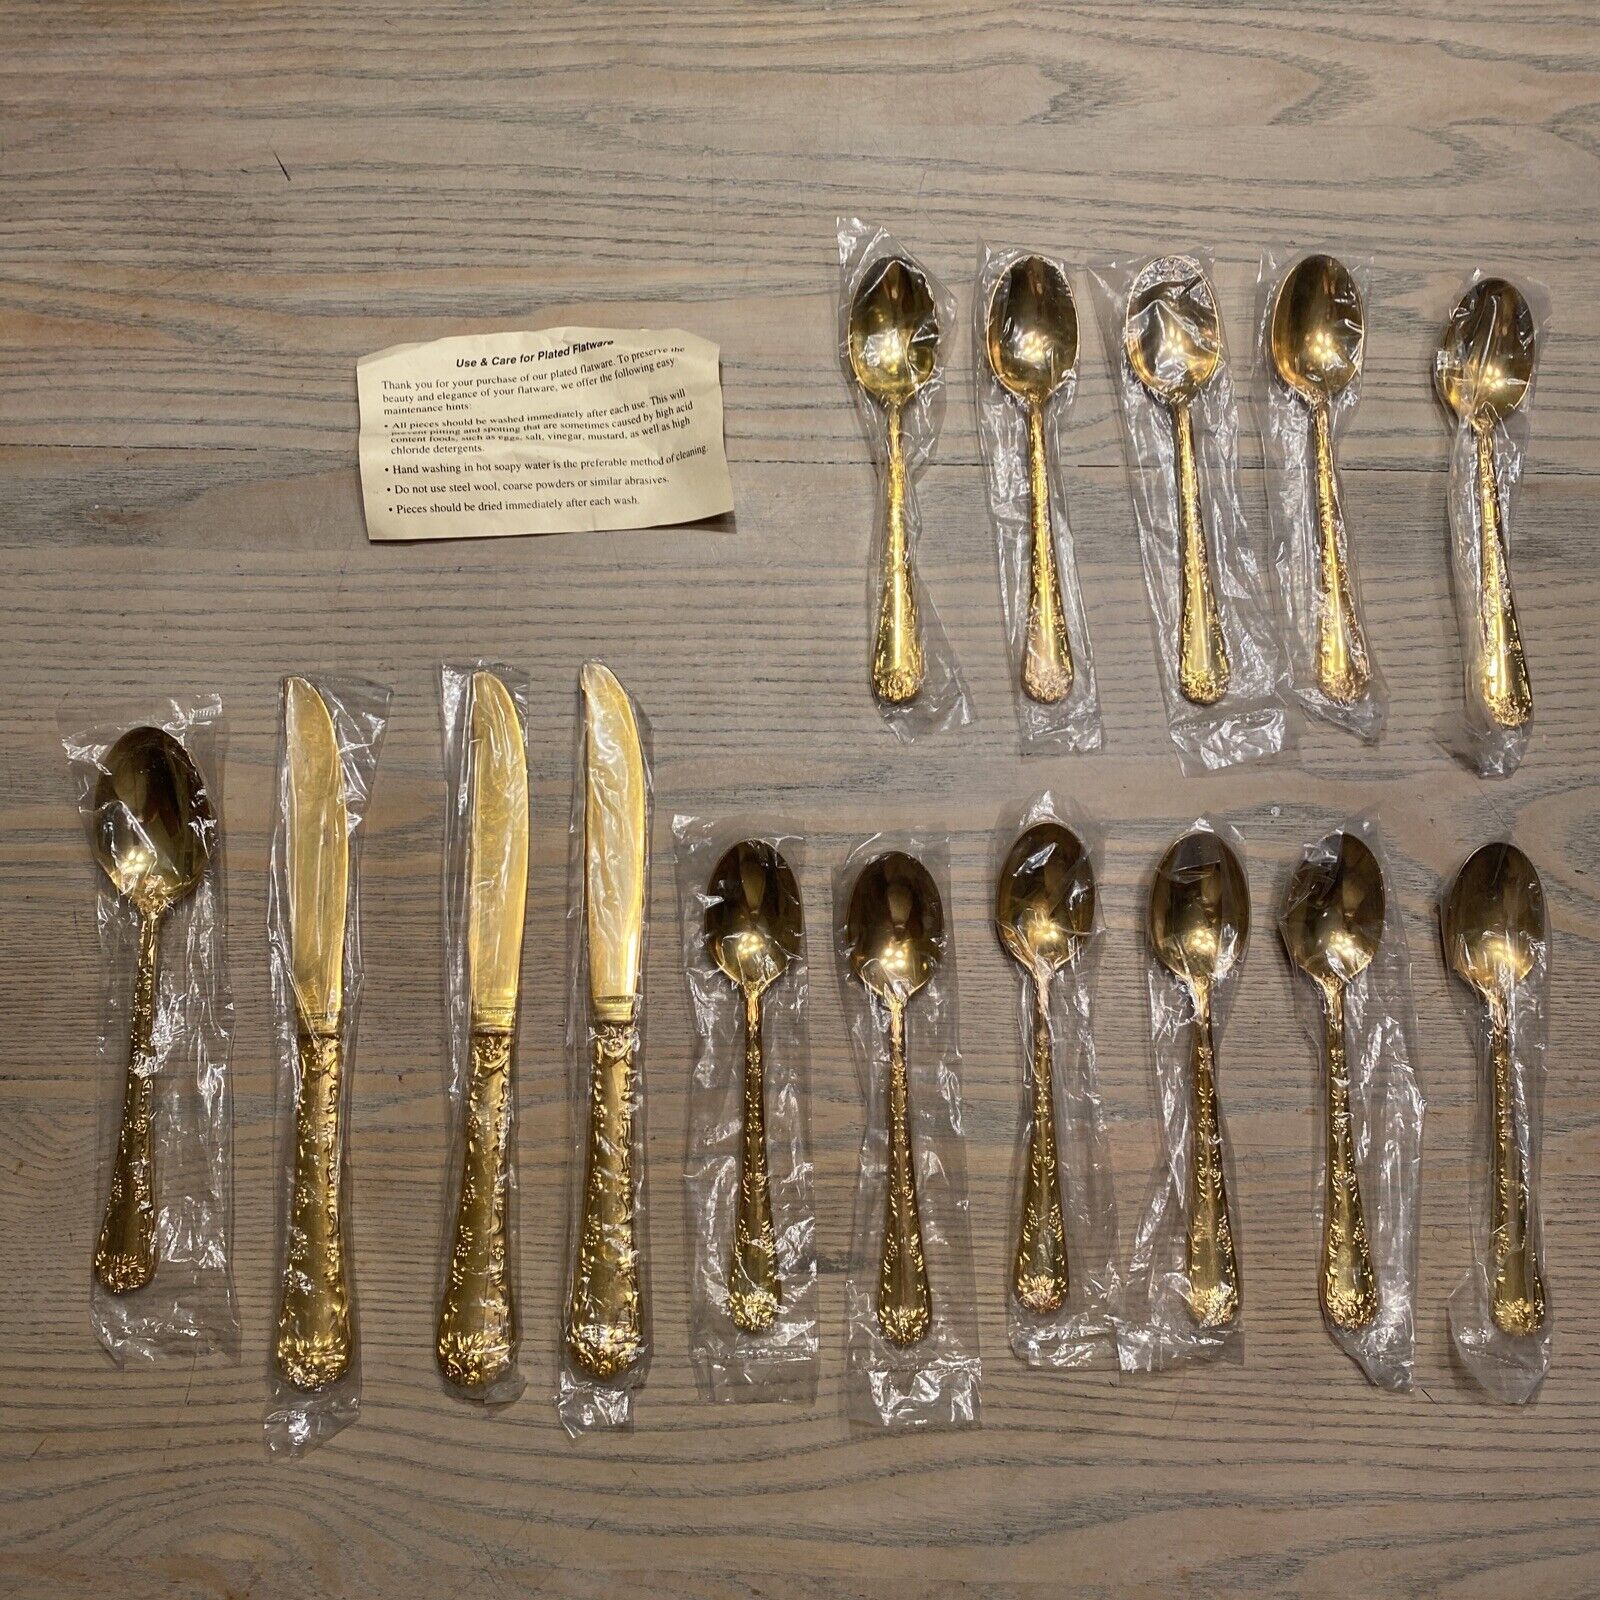 NEW Vintage Lot of 11 Pieces of WM Rogers & Son Gold Flatware Enchanted Rose